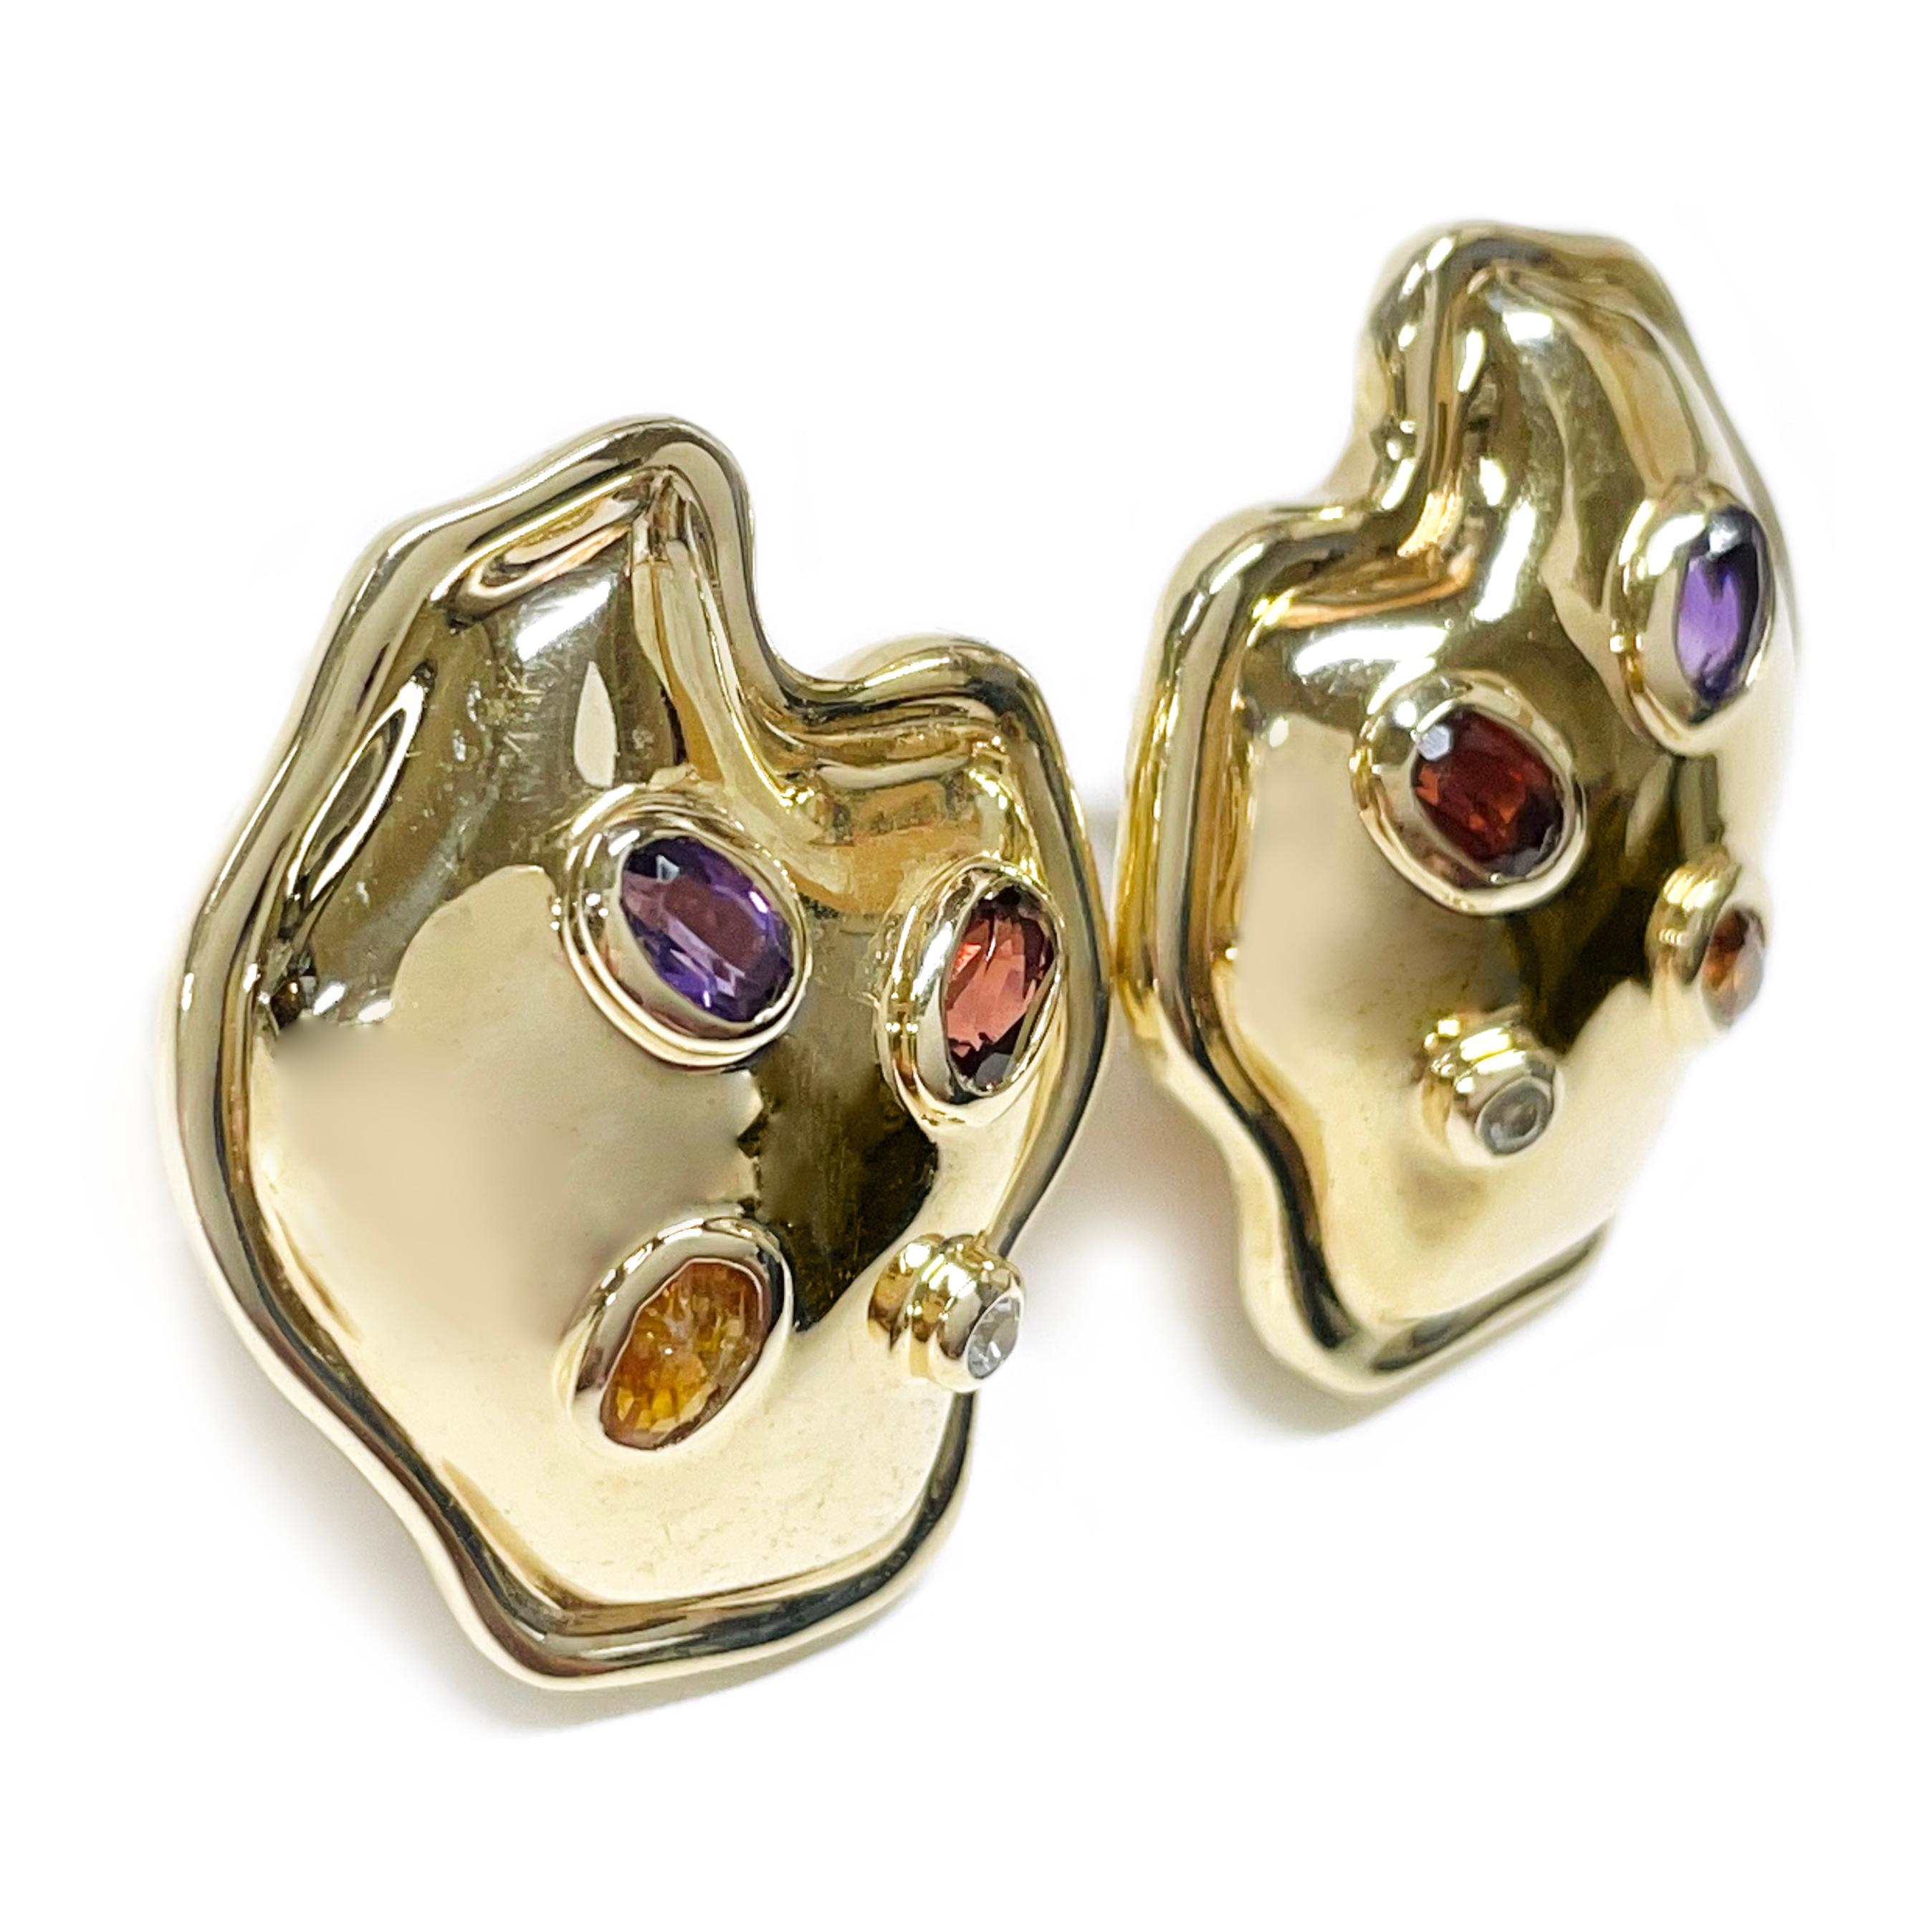 Raafty 14 Karat Yellow Gold Yellow Gold Amethyst Garnet Citrine Topaz Earrings. The earrings have an organic shape and four bezel-set gemstones on each earring. Stamped on the back of the earrings is the maker's mark Raafty and 14K. The earrings